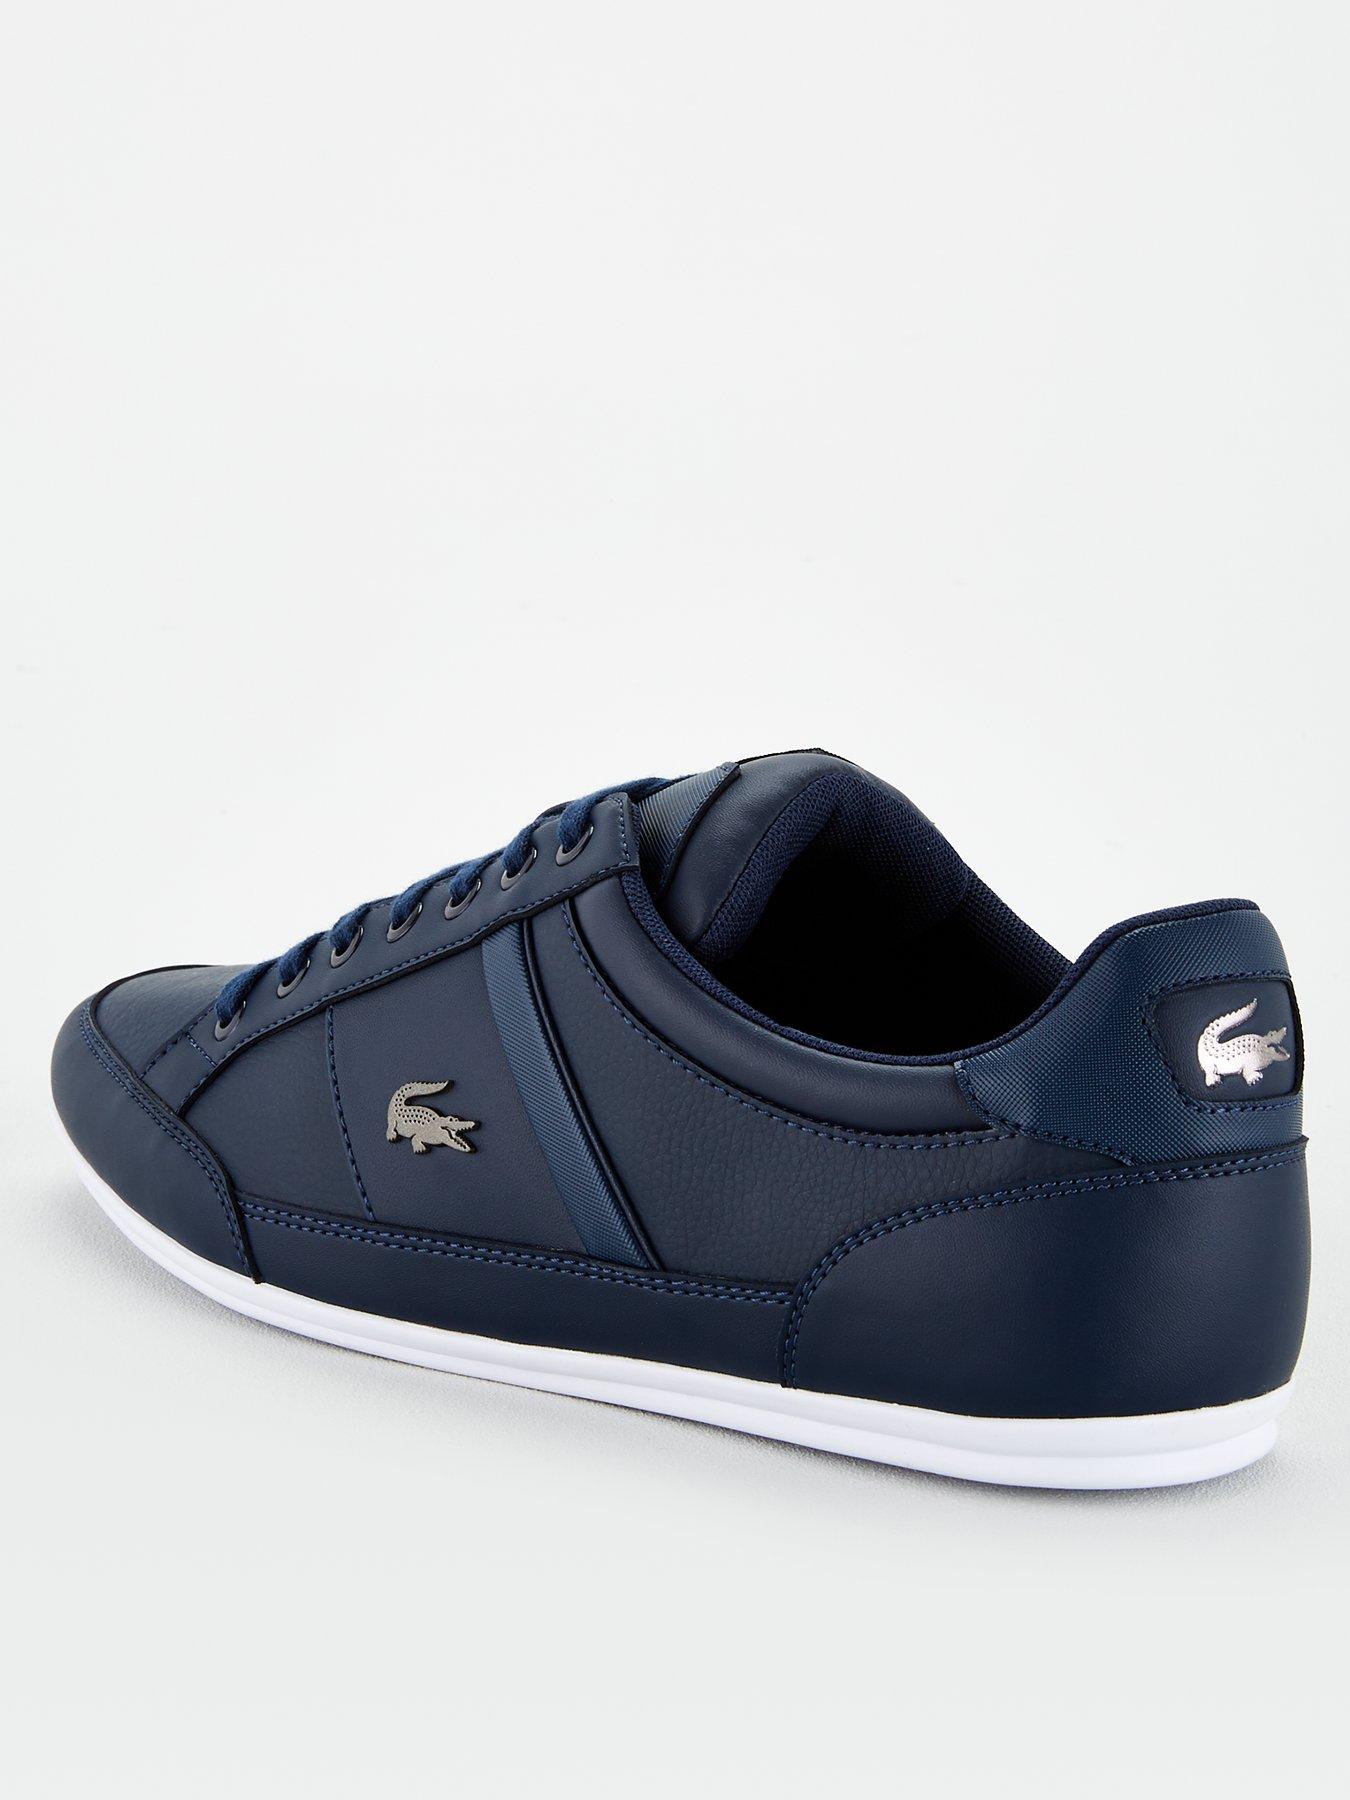 Lacoste Chaymon Trainers - Navy | very 